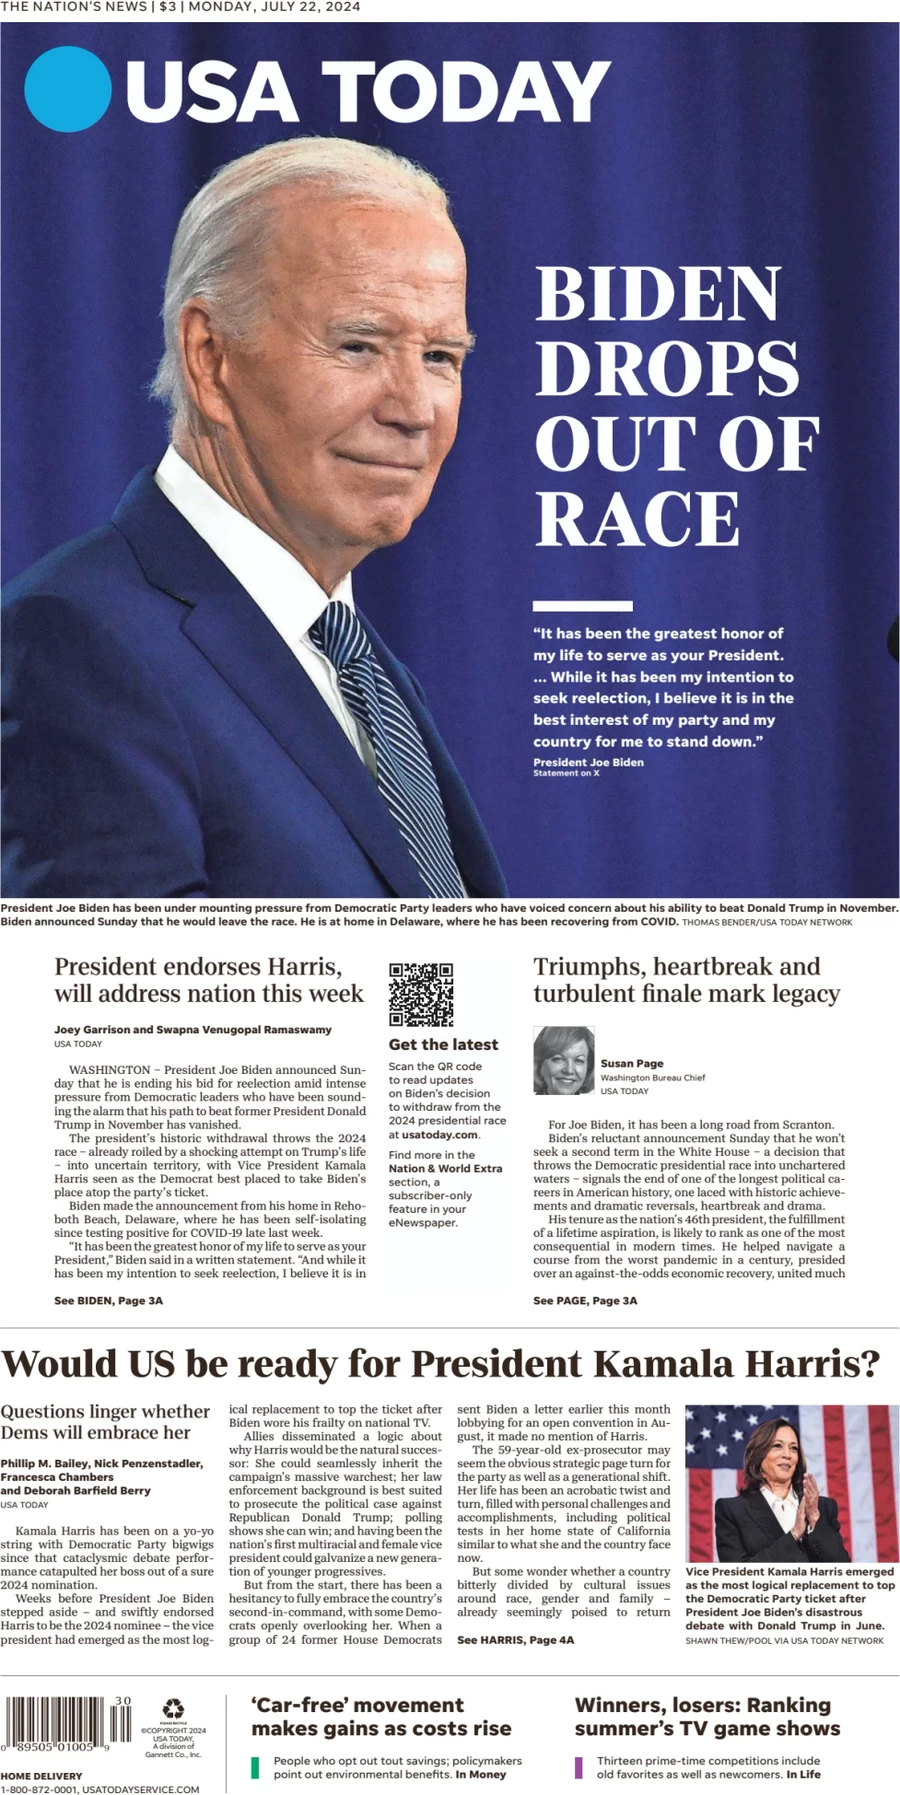 USA Today - Biden drops out of race
